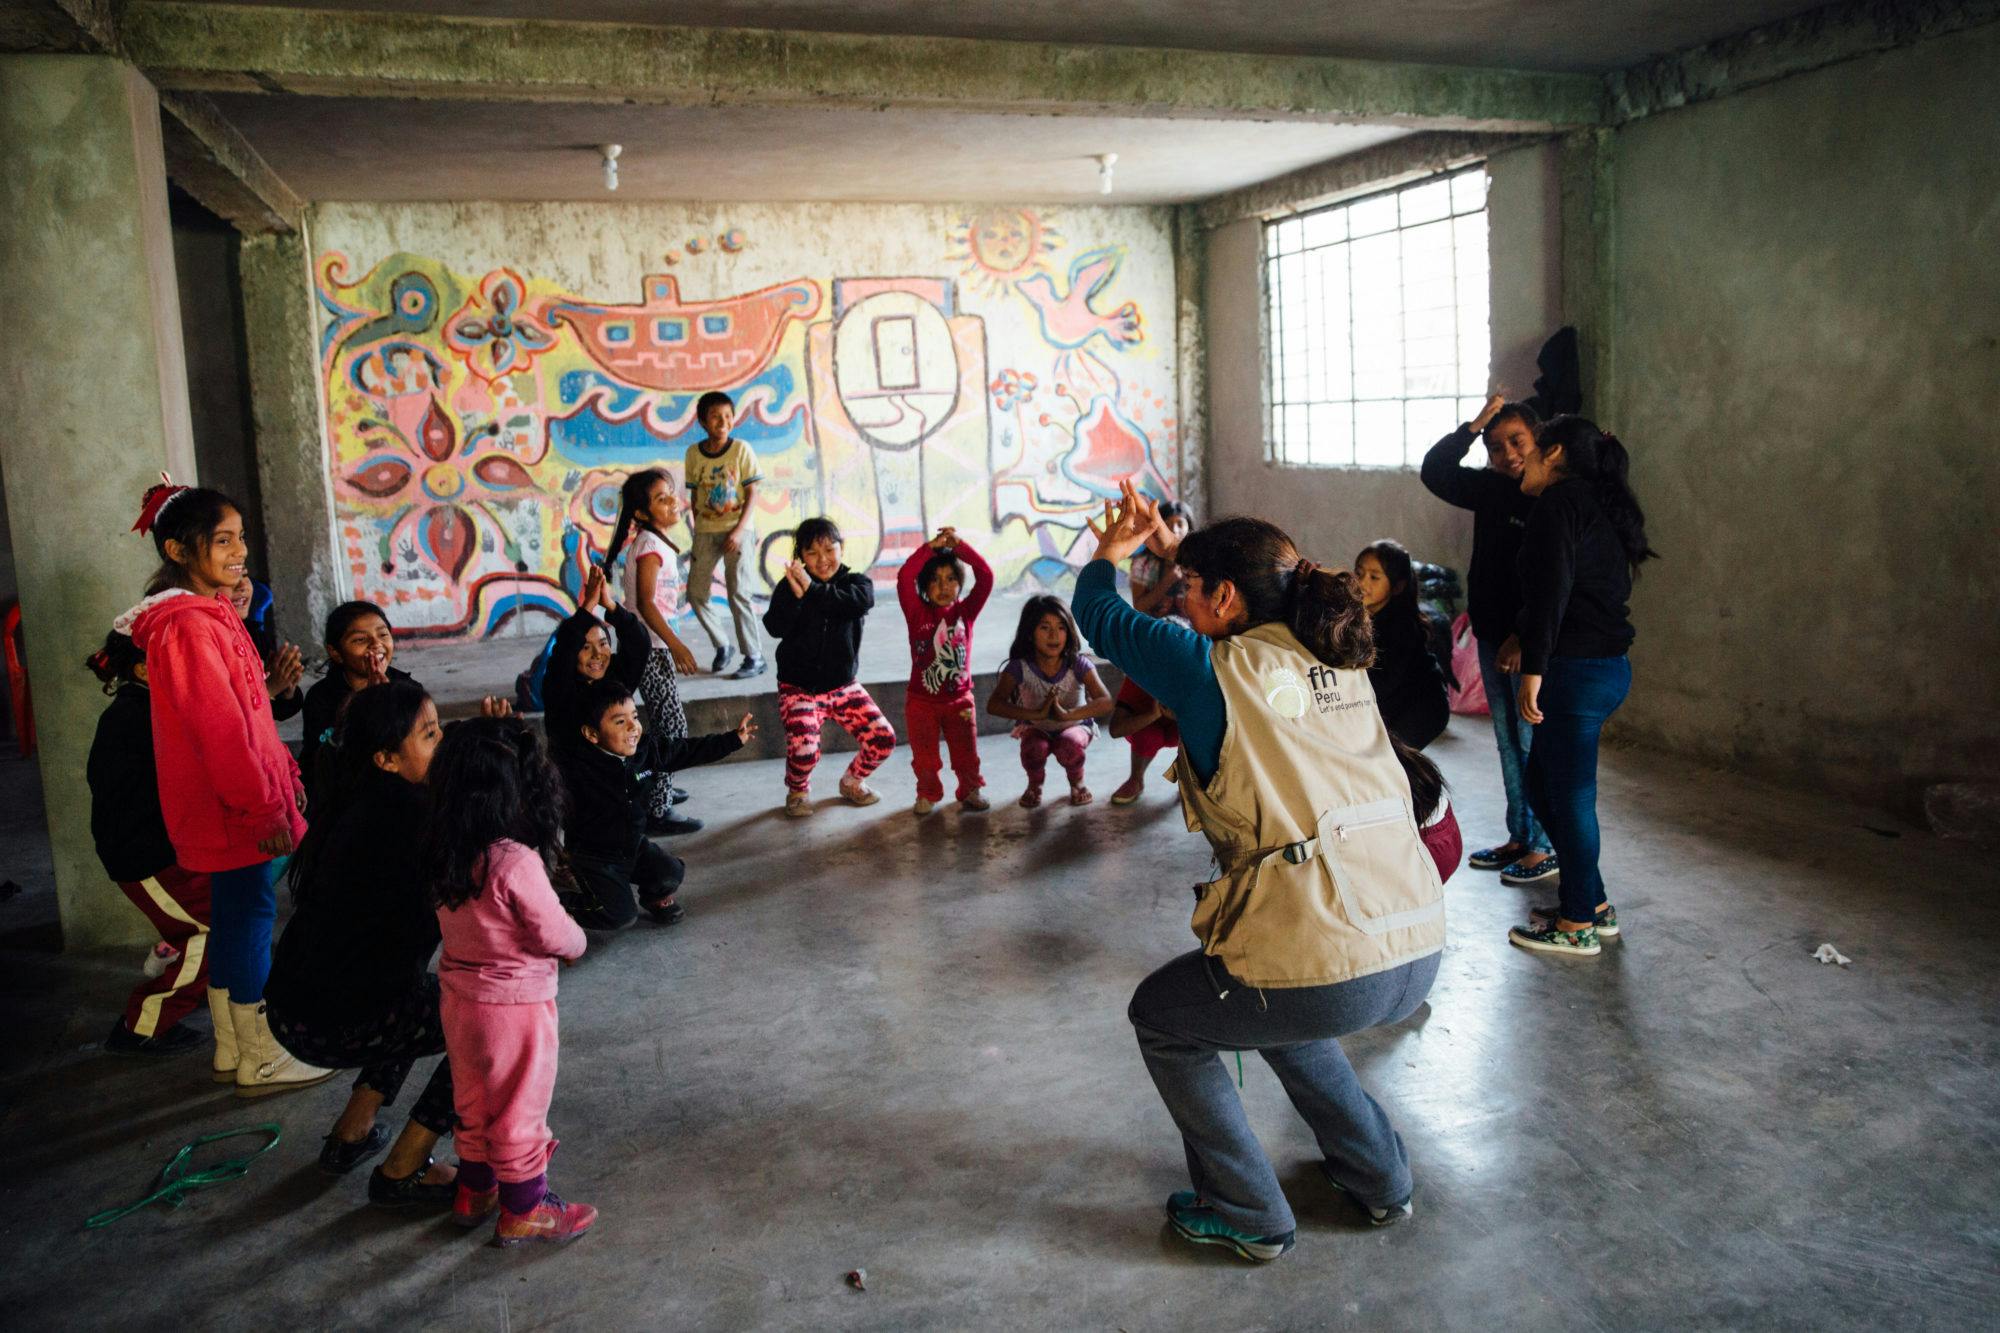 Children in Peru stand in a classroom, playing games in a circle to improve their social emotional skills as part of an early childhood learning program.